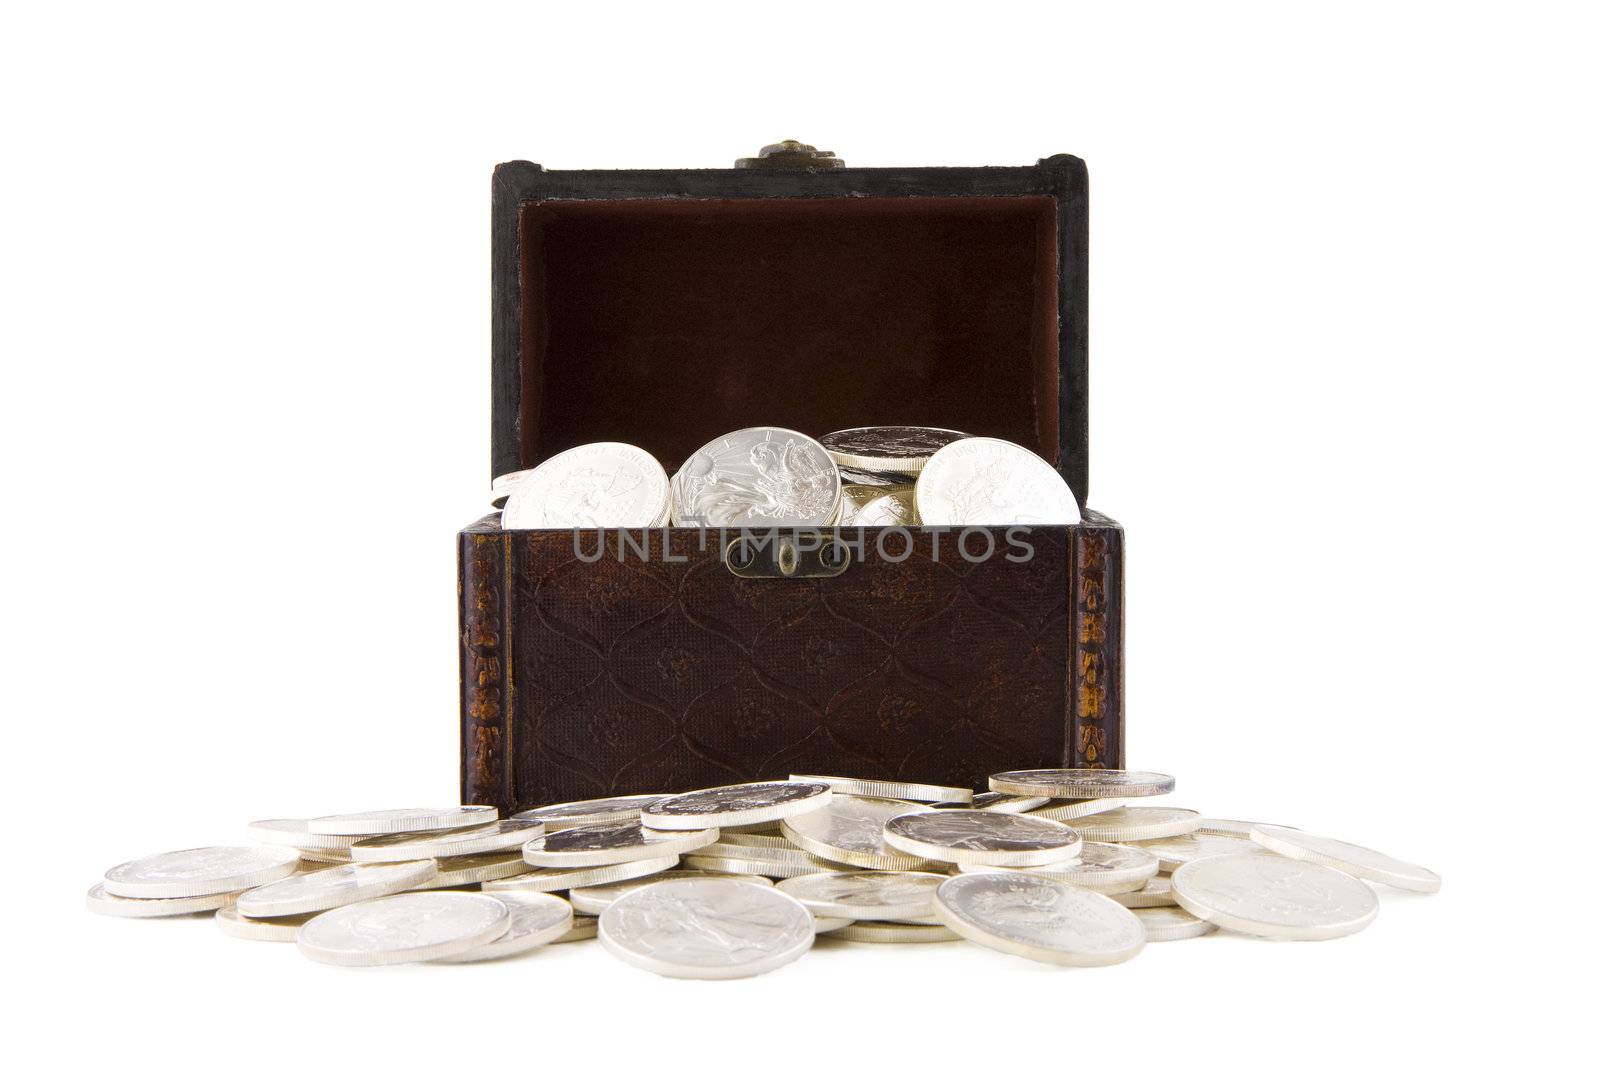 Retro case full of silver coins by Gbuglok